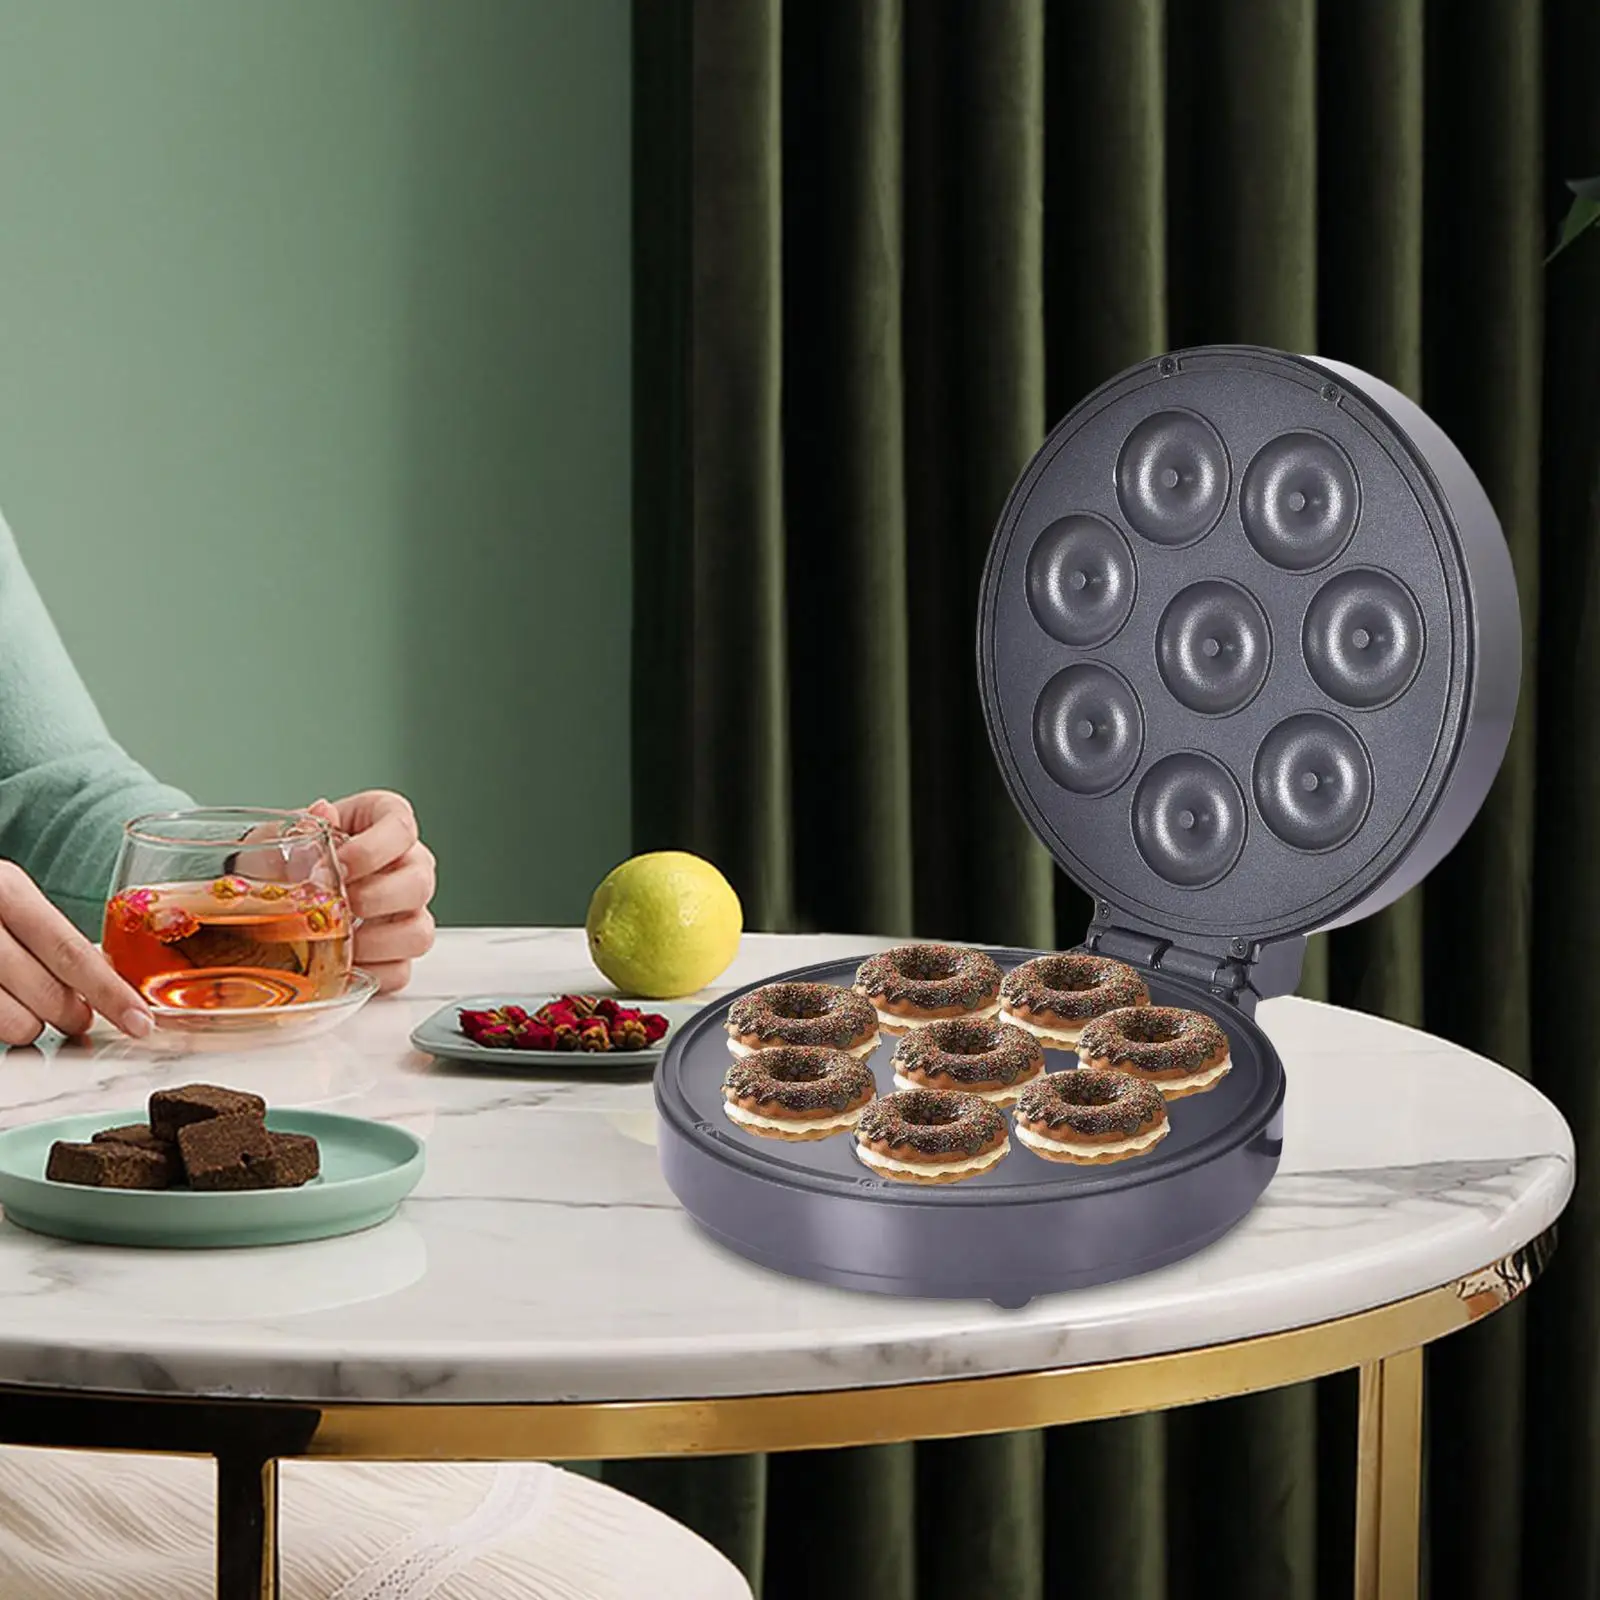 Donut Maker Machine Snack with Indicator Light Easy to Clean Waffle Doughnut Machine for Home